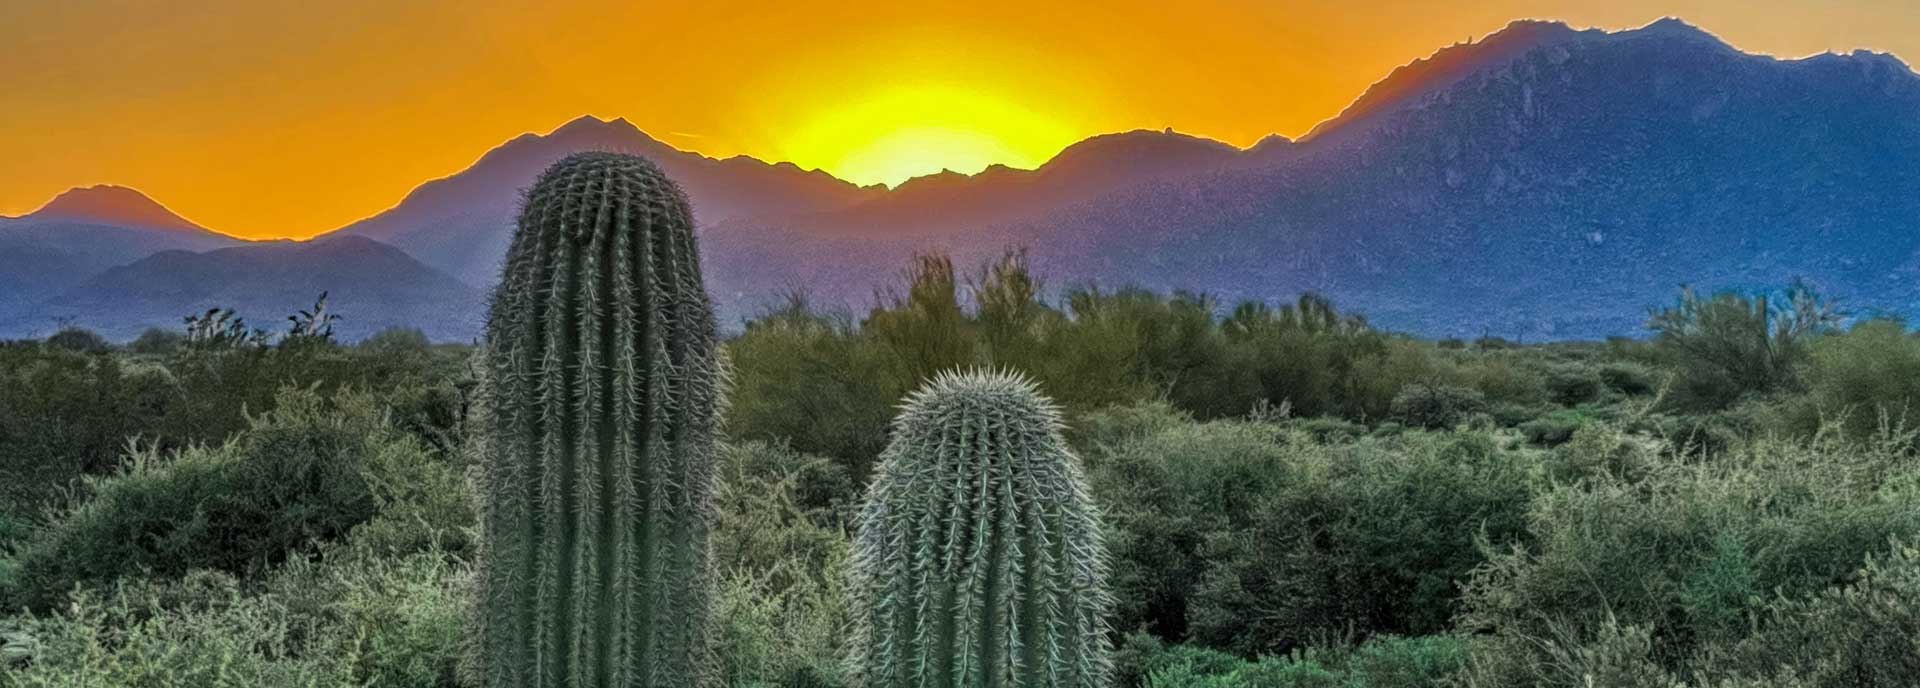 Desert scene with cactus in the forground and sunset behind mountains in the background.